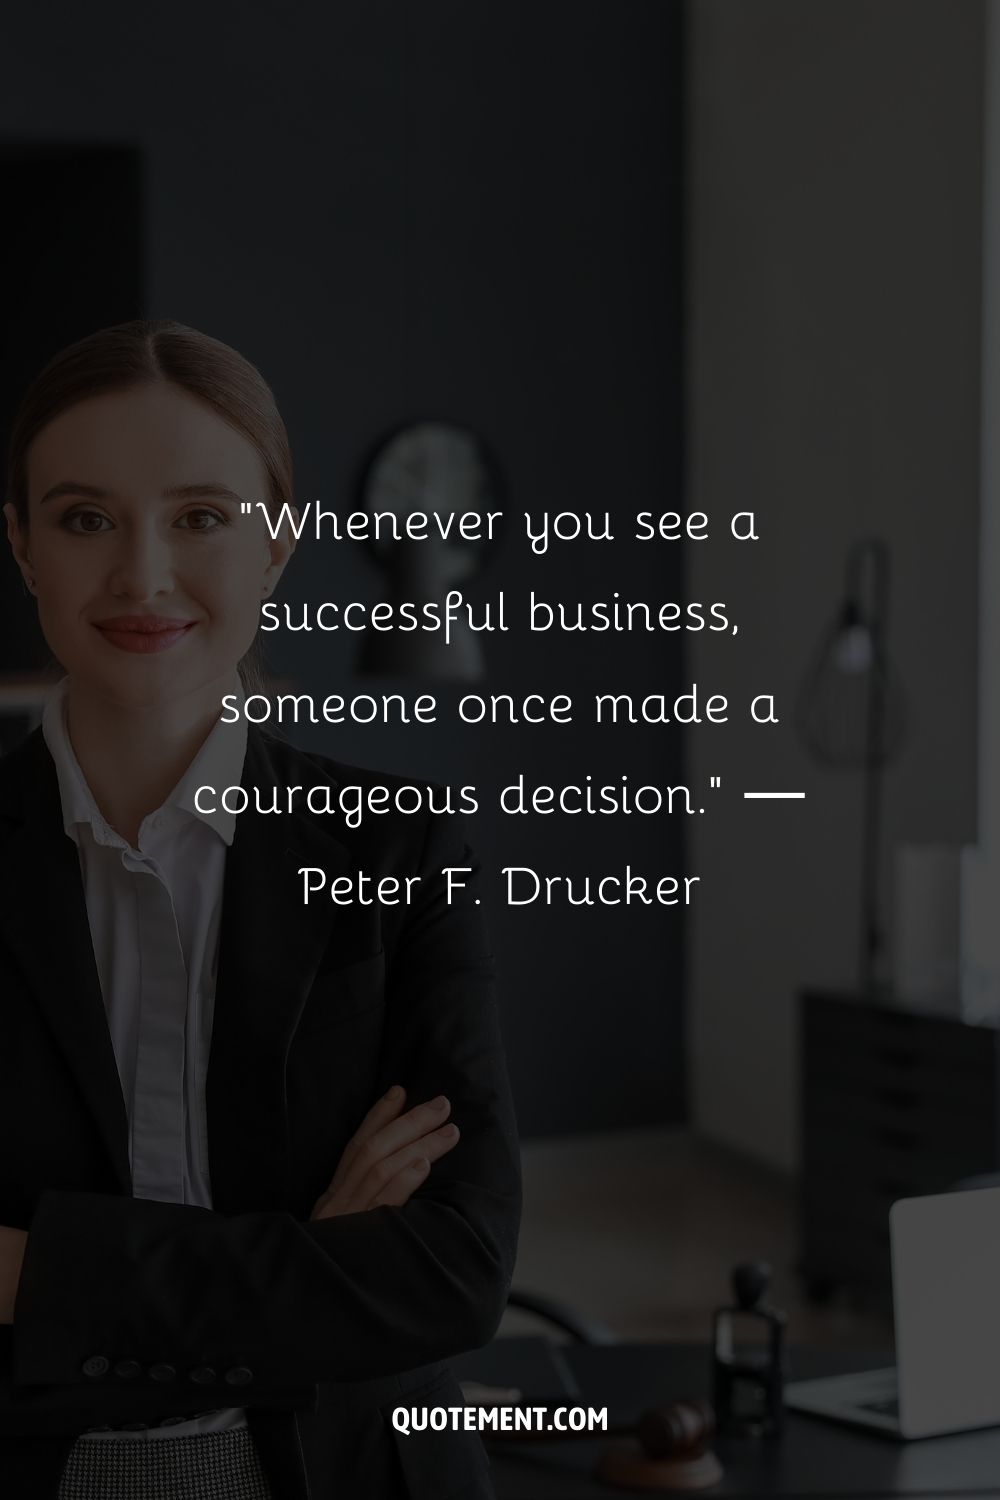 “Whenever you see a successful business, someone once made a courageous decision.” ― Peter F. Drucker